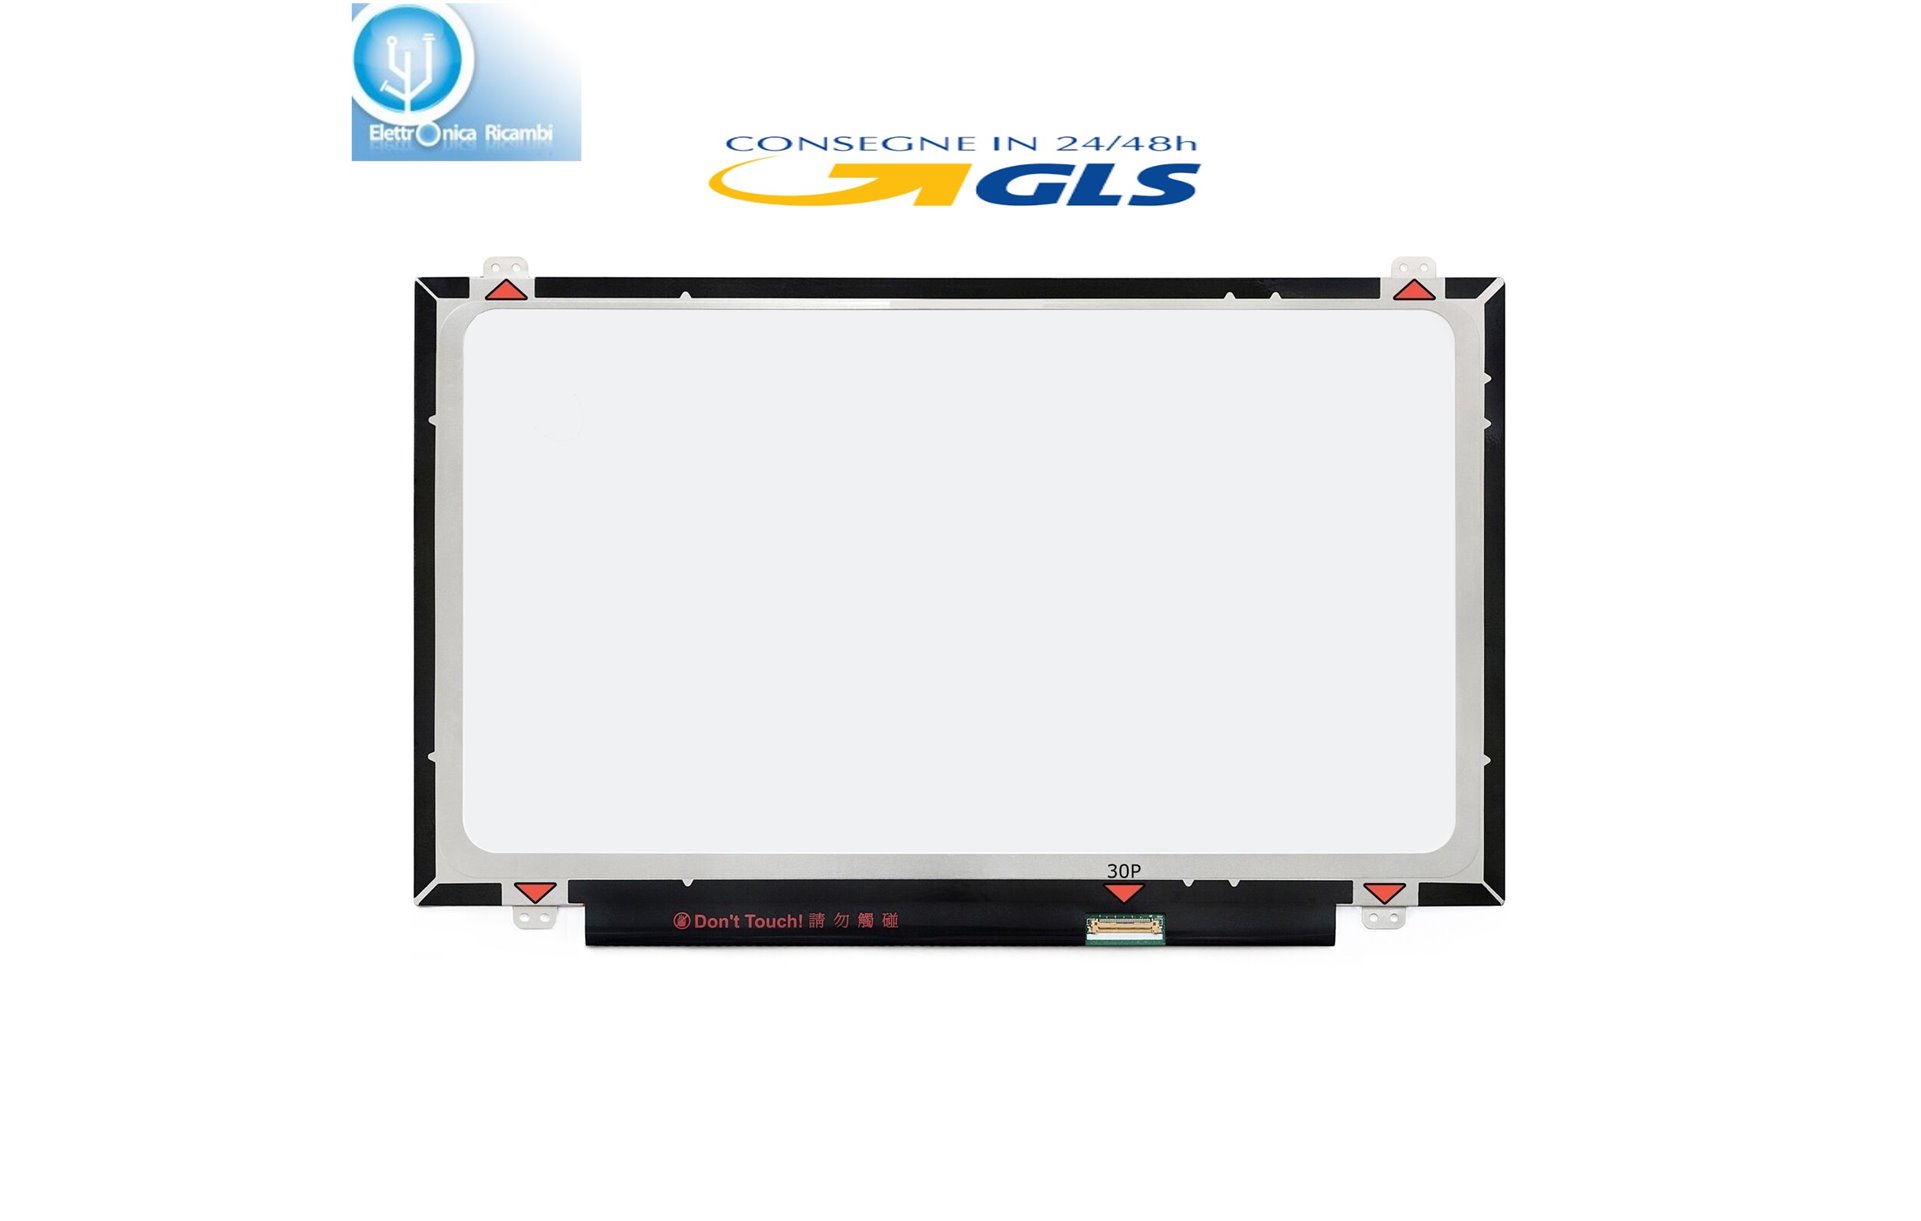 Display LCD Acer ASPIRE TIMELINE ULTRA M5-481PT SERIES Schermo 14.0 LED SLIM 30 pin HD (1366x768)